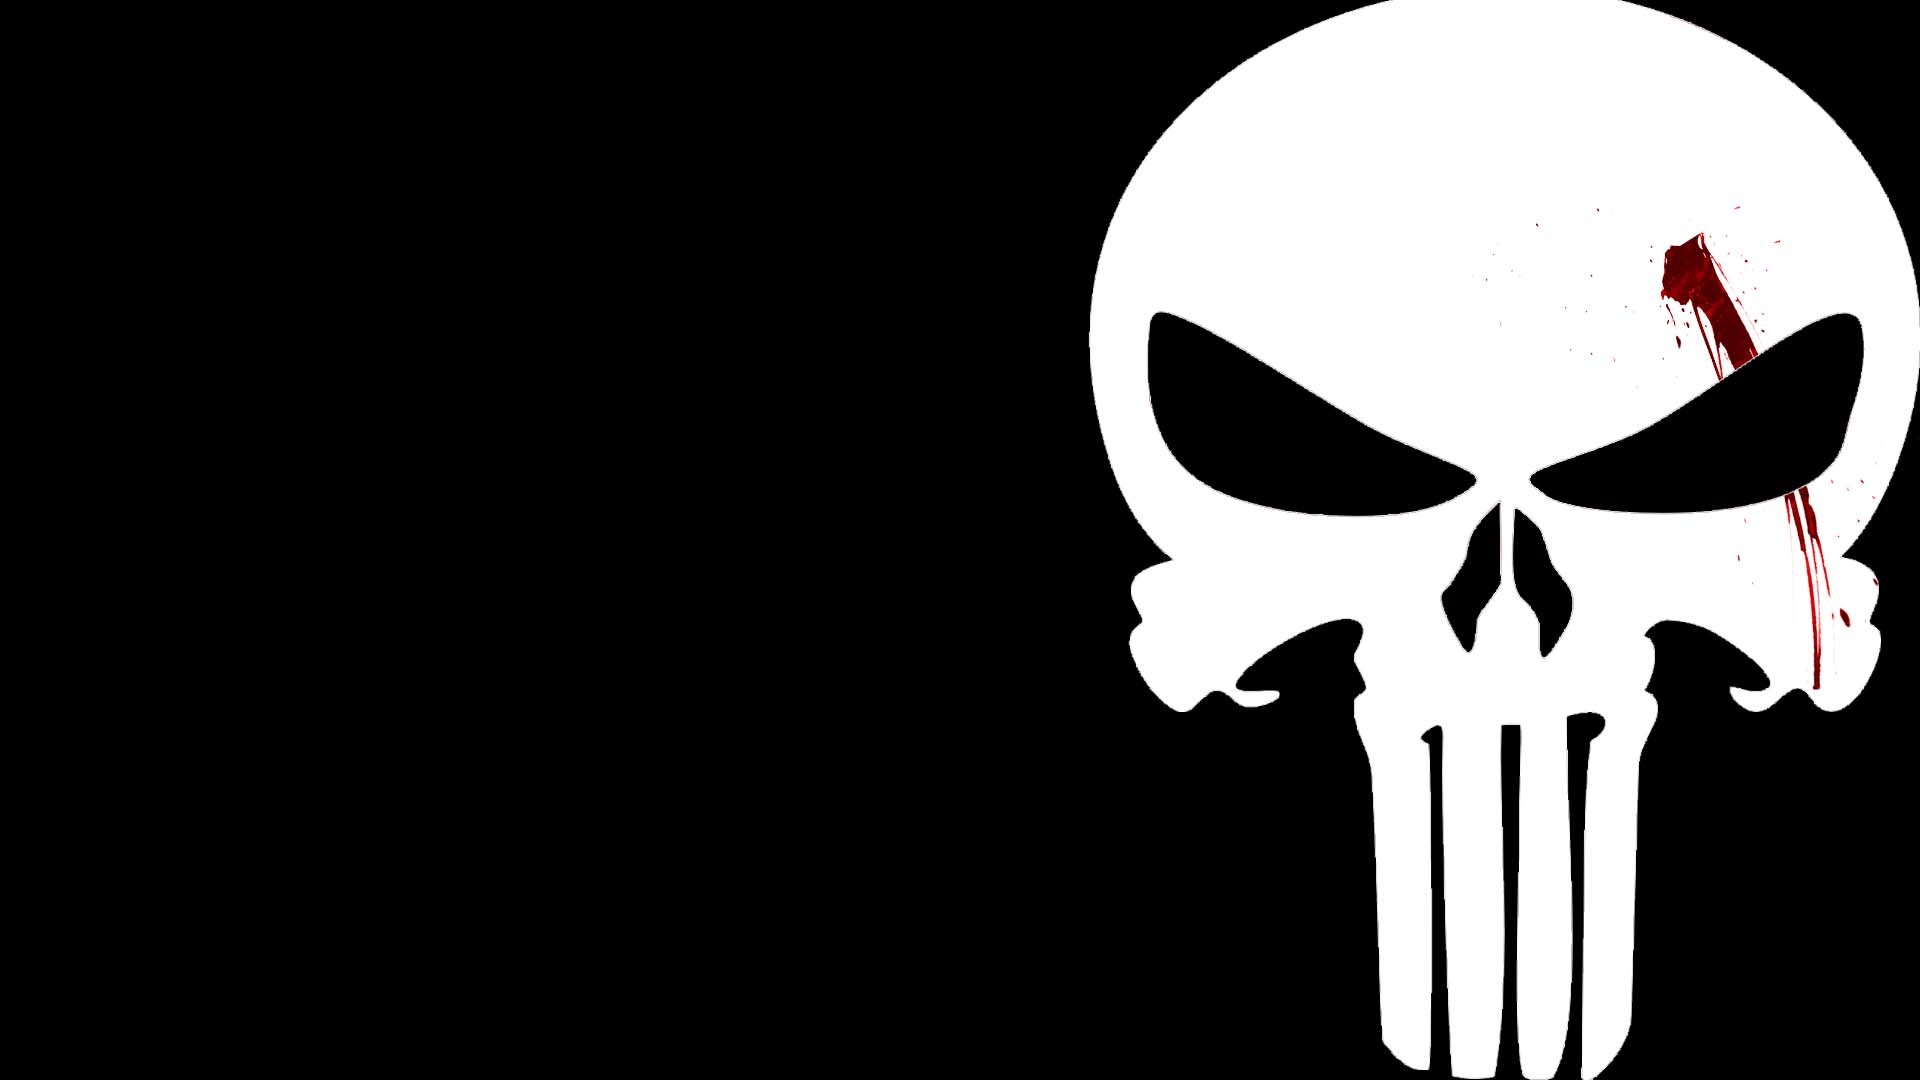 The Punisher Logo Iphone Wallpapers Iphone 5 S 4 S 3g Wallpapers 1920x1080